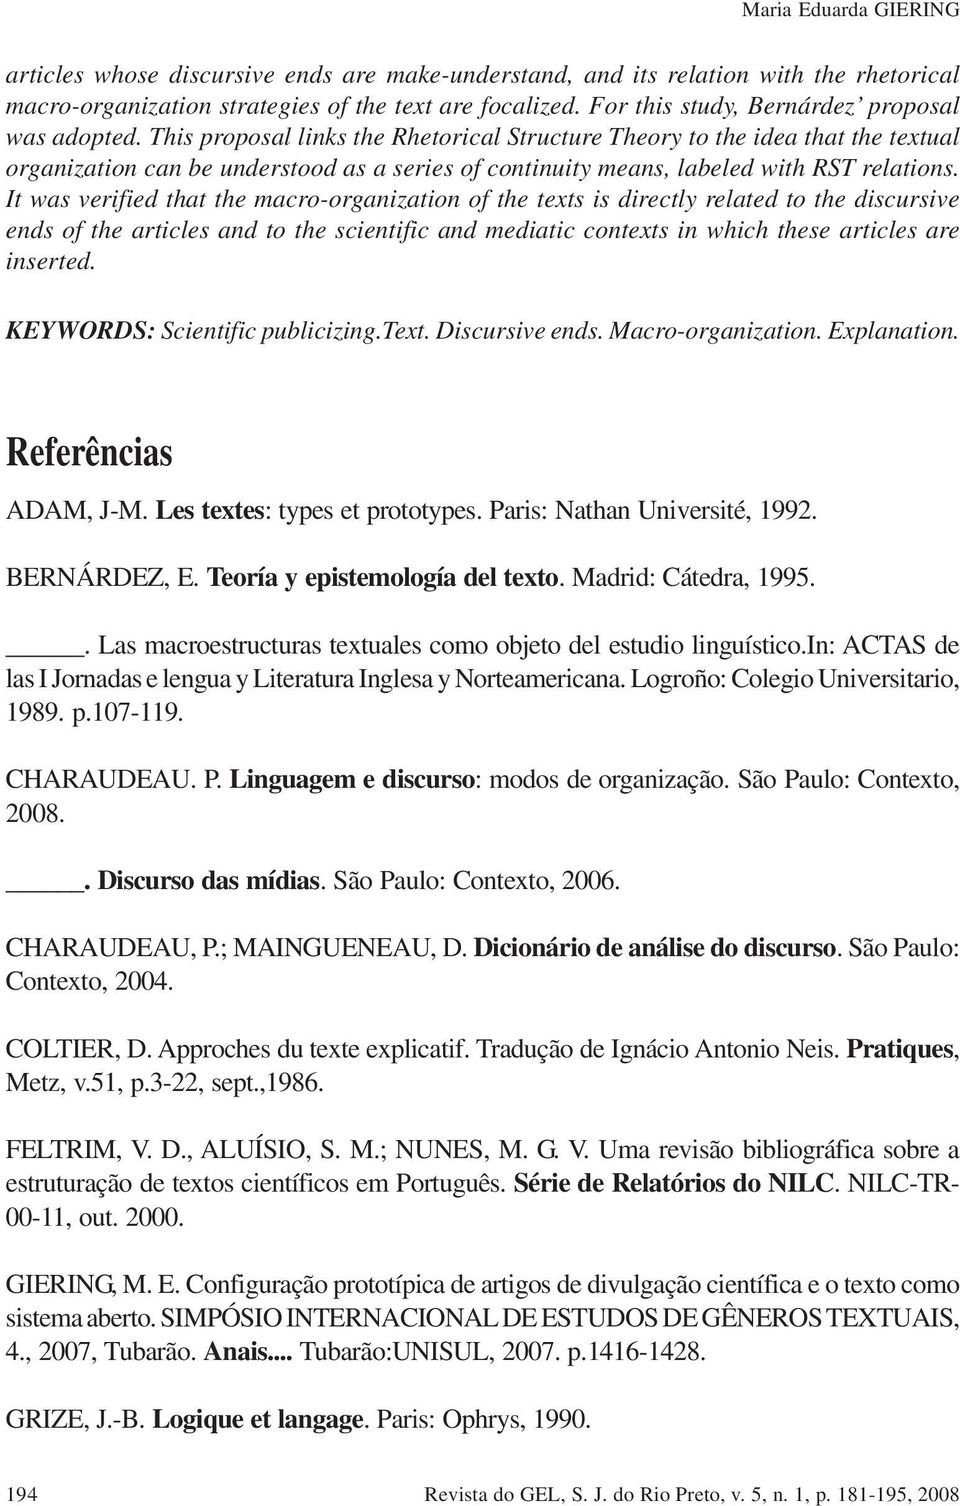 This proposal links the Rhetorical Structure Theory to the idea that the textual organization can be understood as a series of continuity means, labeled with RST relations.